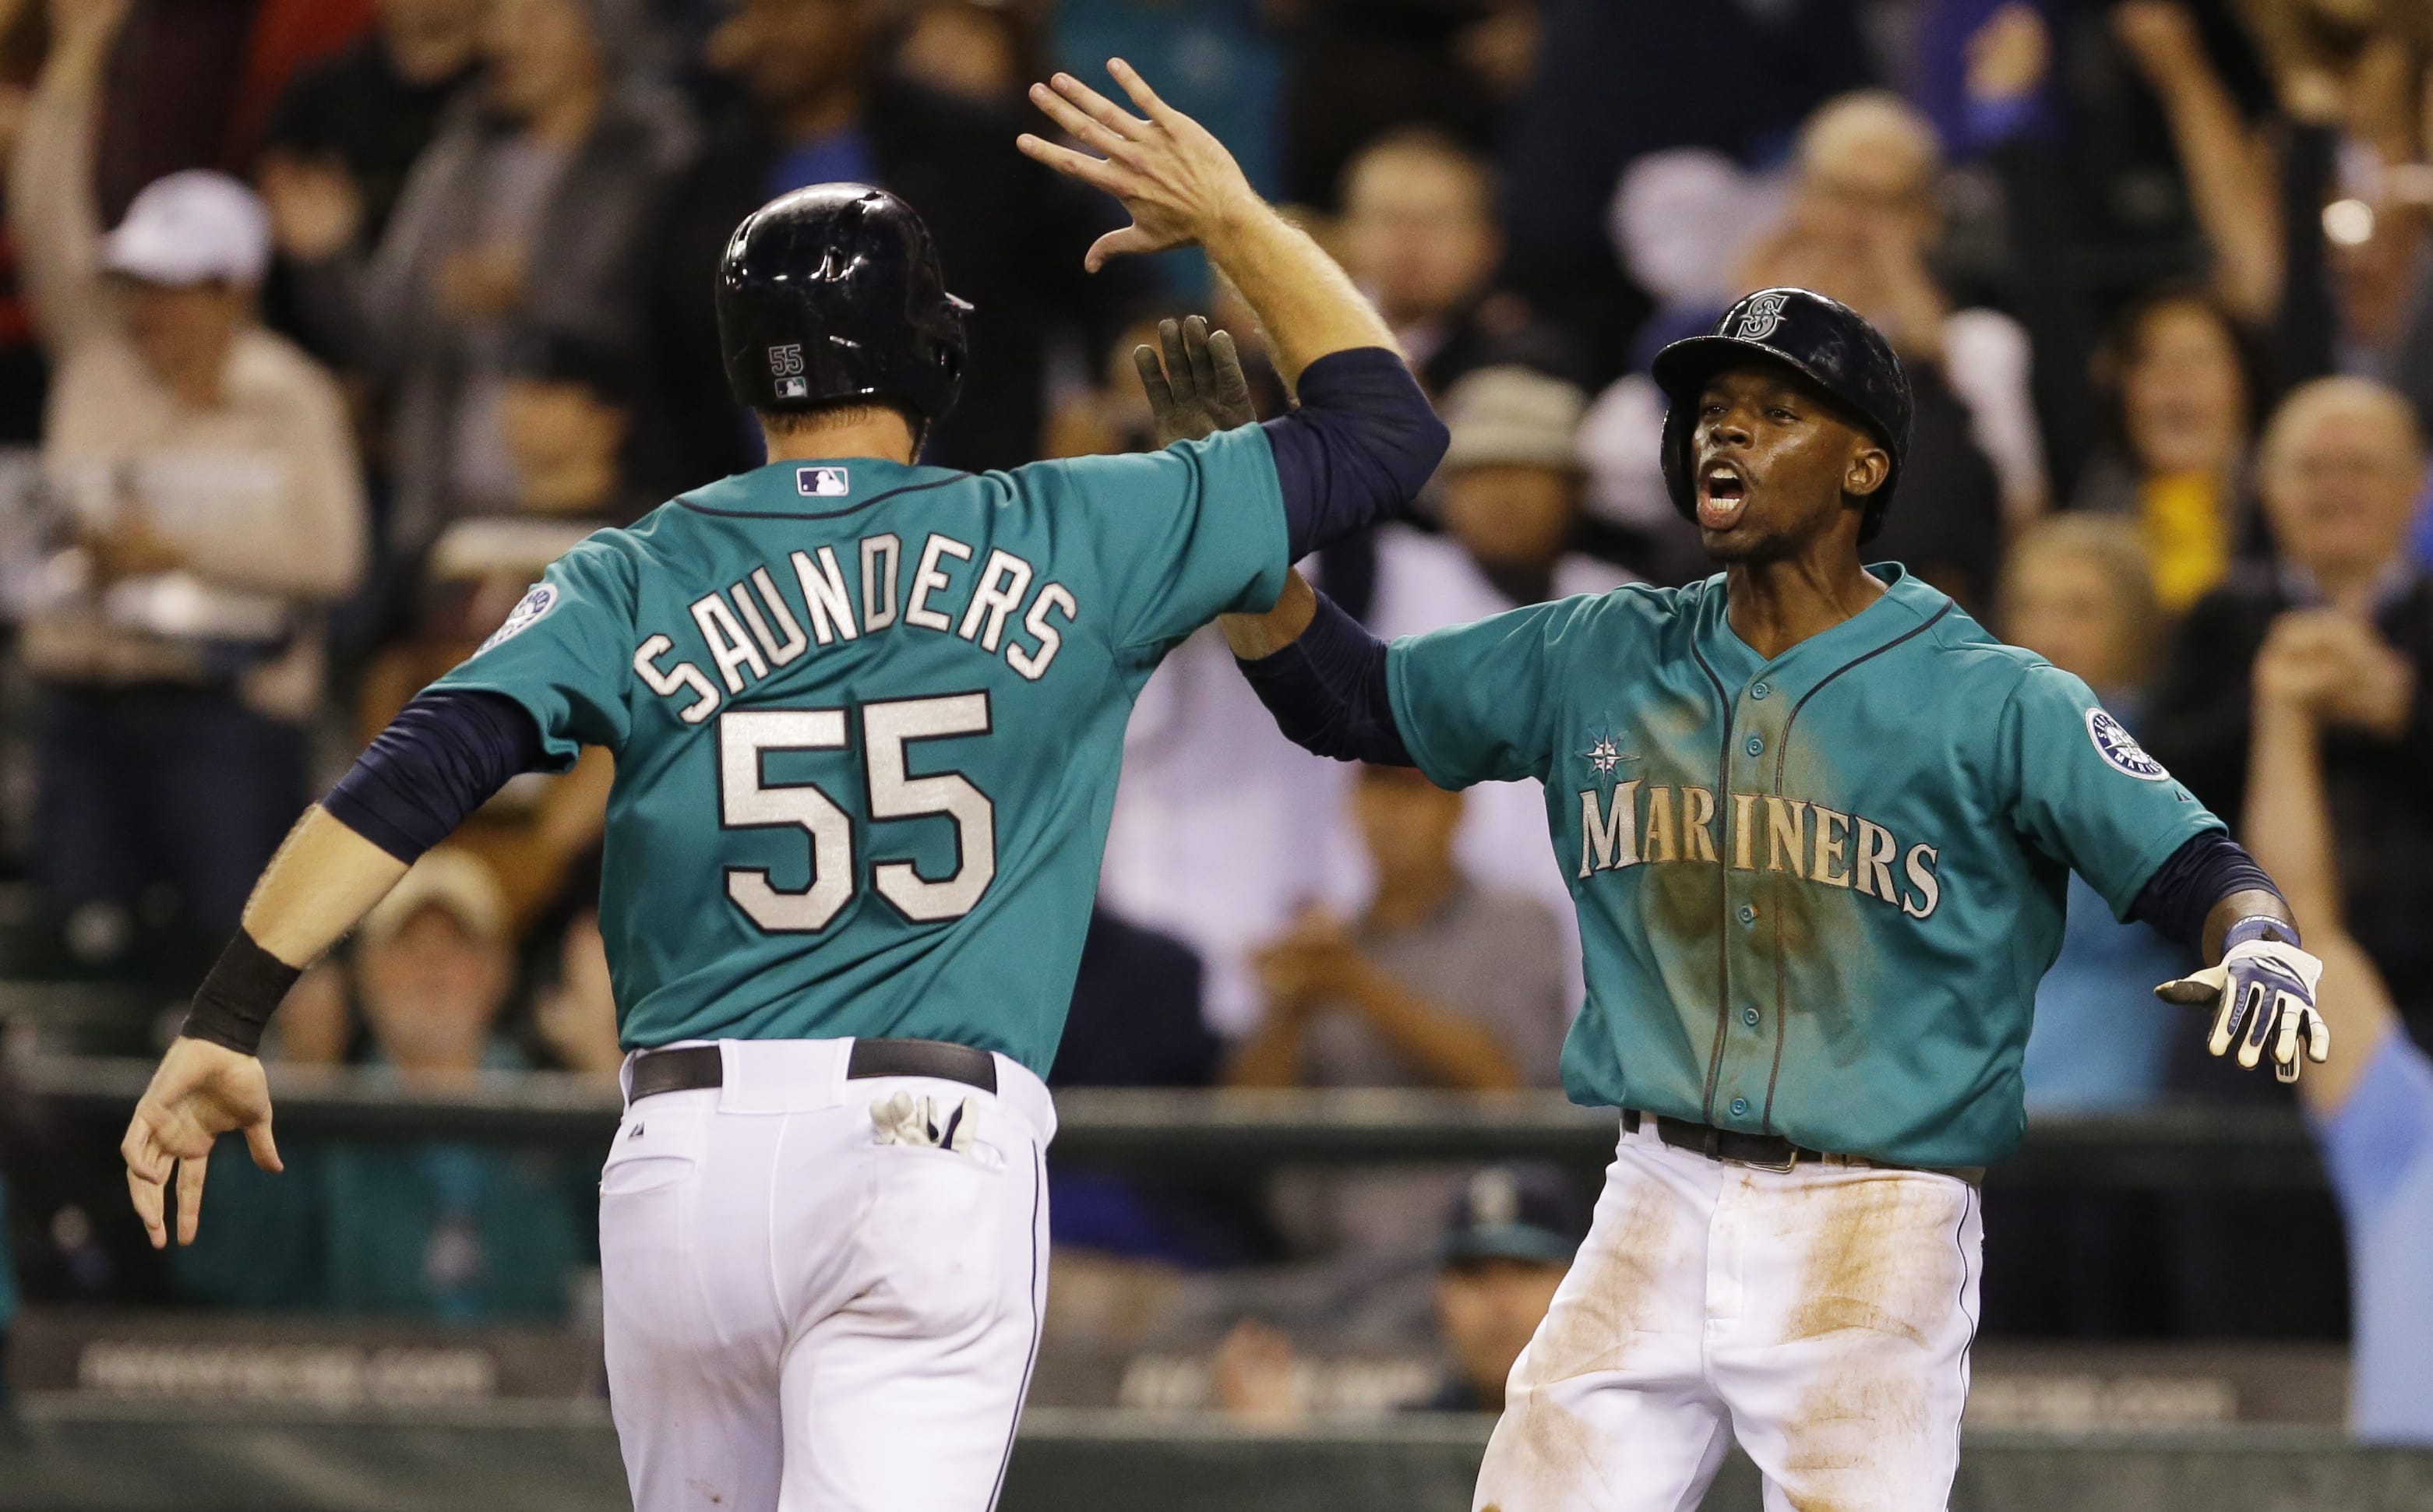 Seattle Mariners' James Jones, right, greets Michael Saunders at the plate after they both scored on a triple hit by Mariners' Brad Miller in the eighth inning of a baseball game against the Houston Astros, Monday, Sept. 8, 2014, in Seattle. (AP Photo/Ted S.